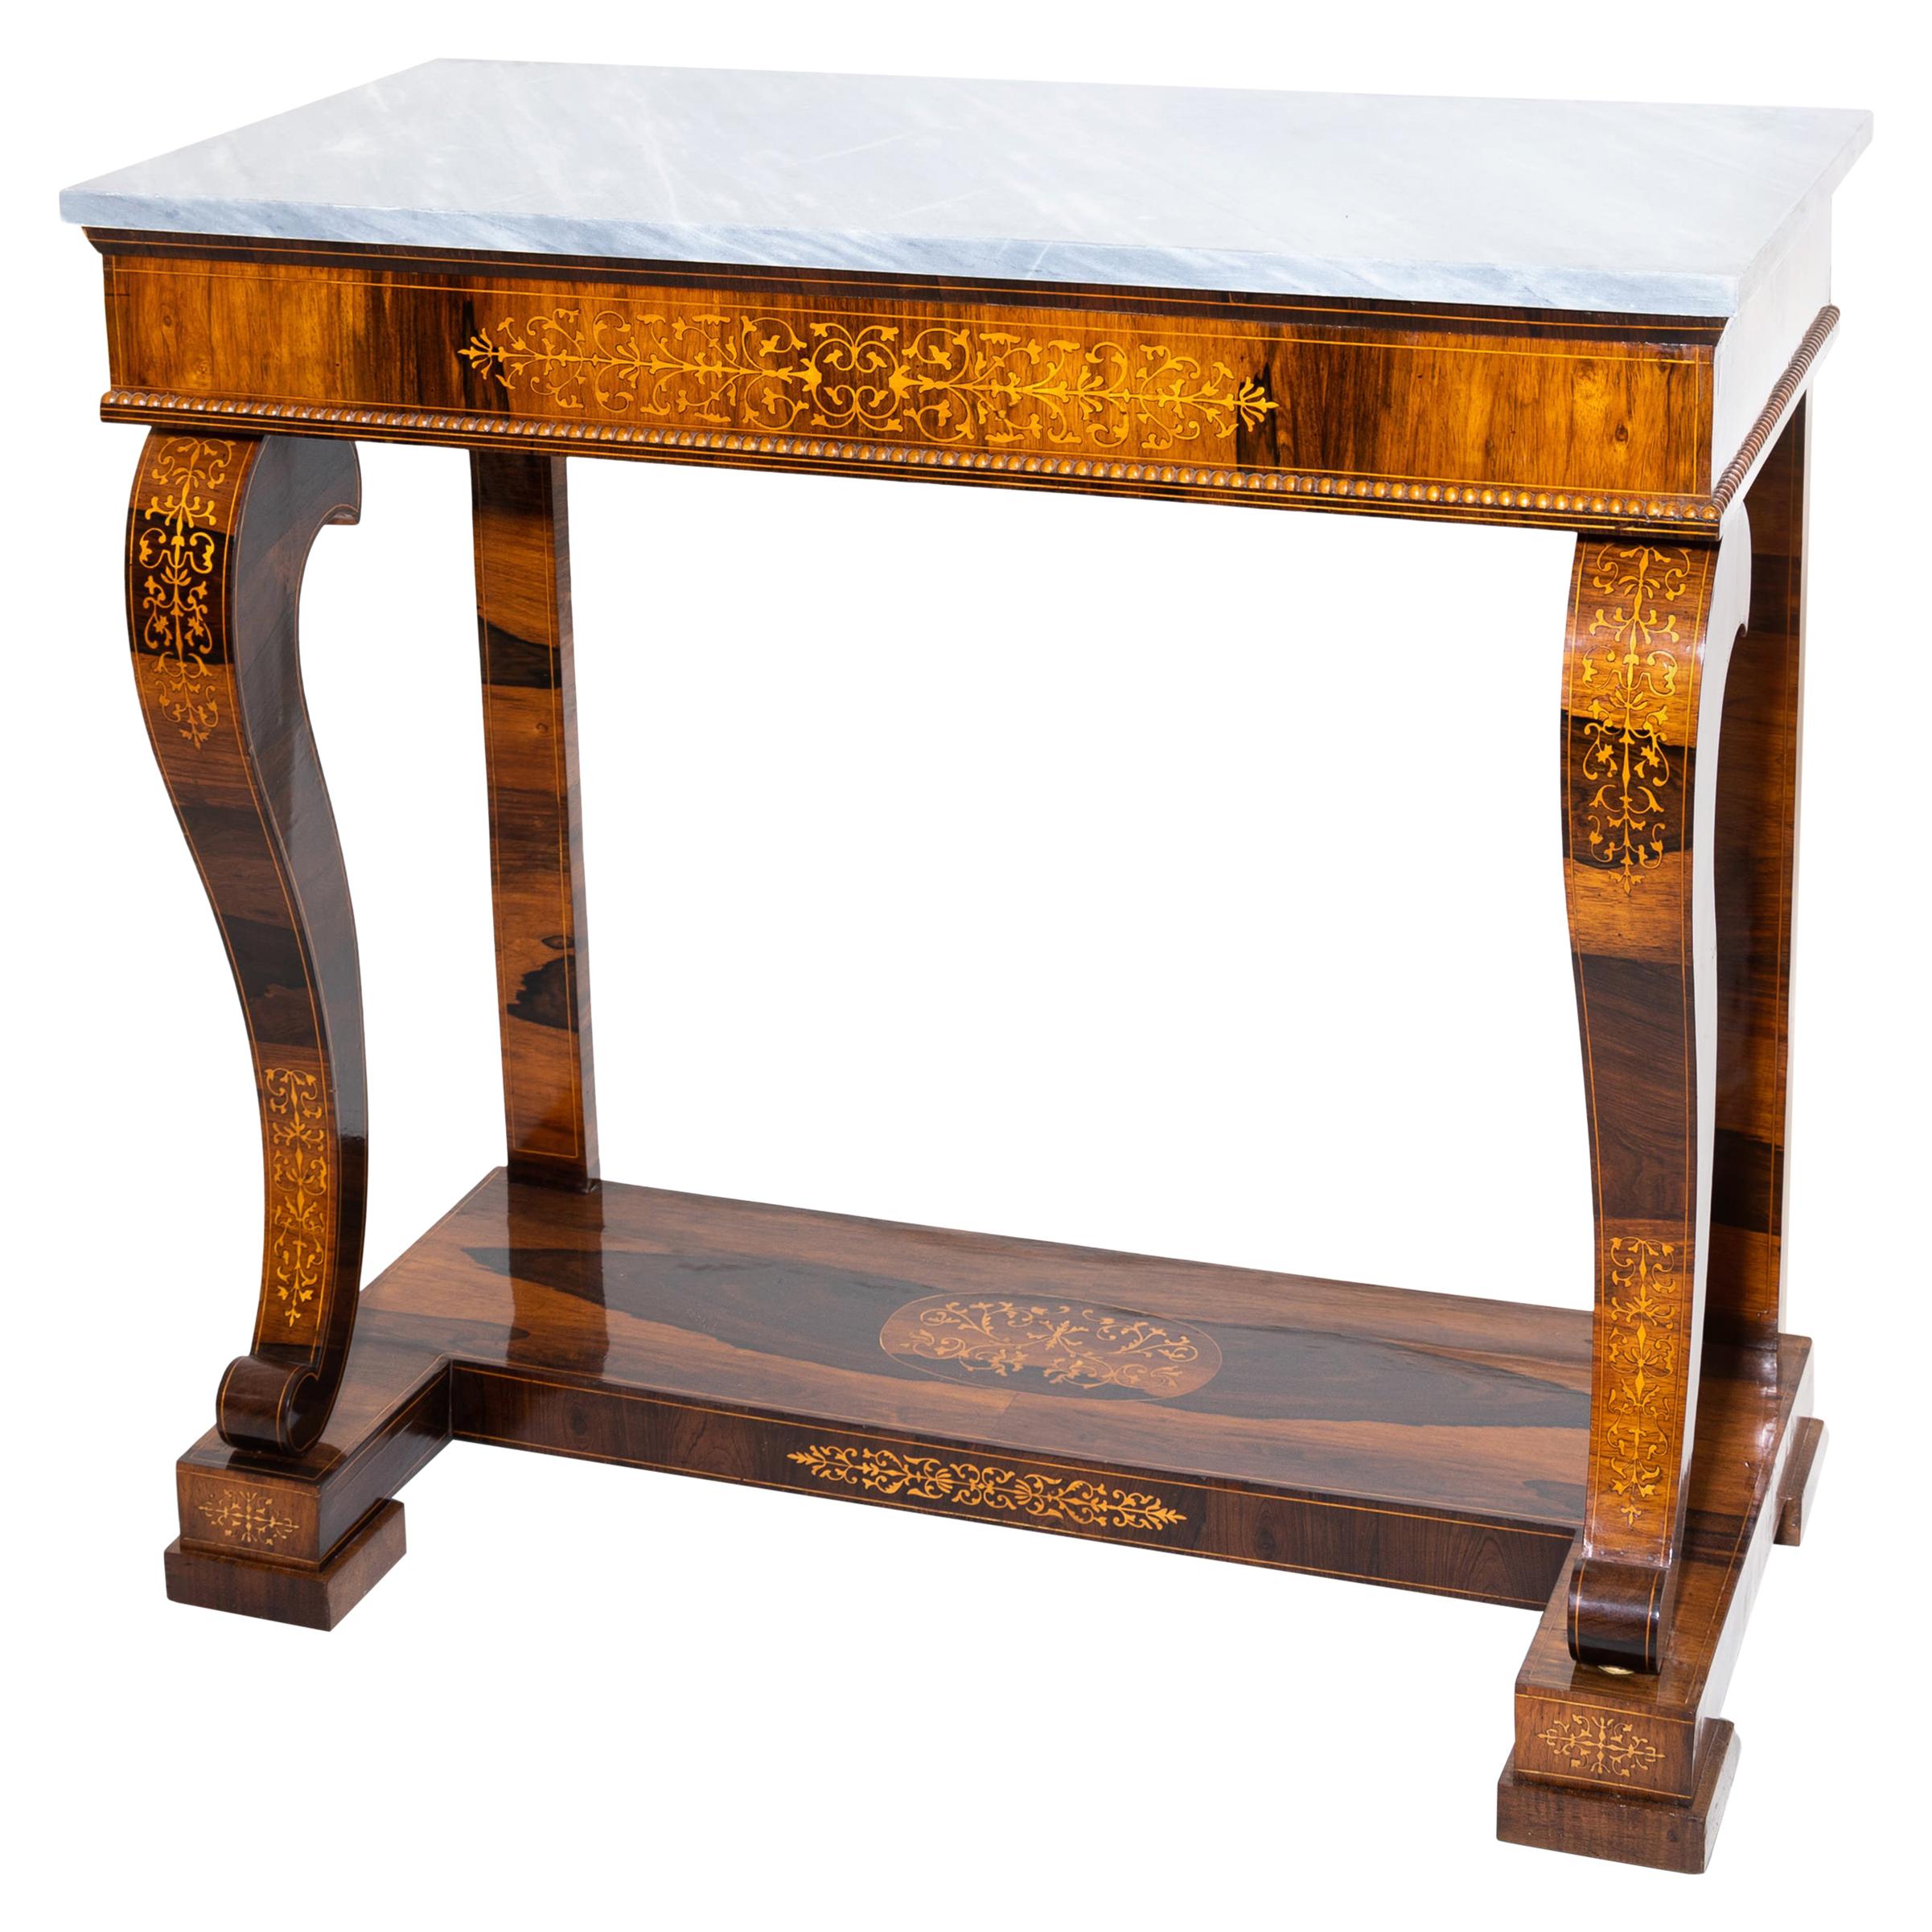 Charles X Mahogany Console Table, France, First Half of the 19th Century